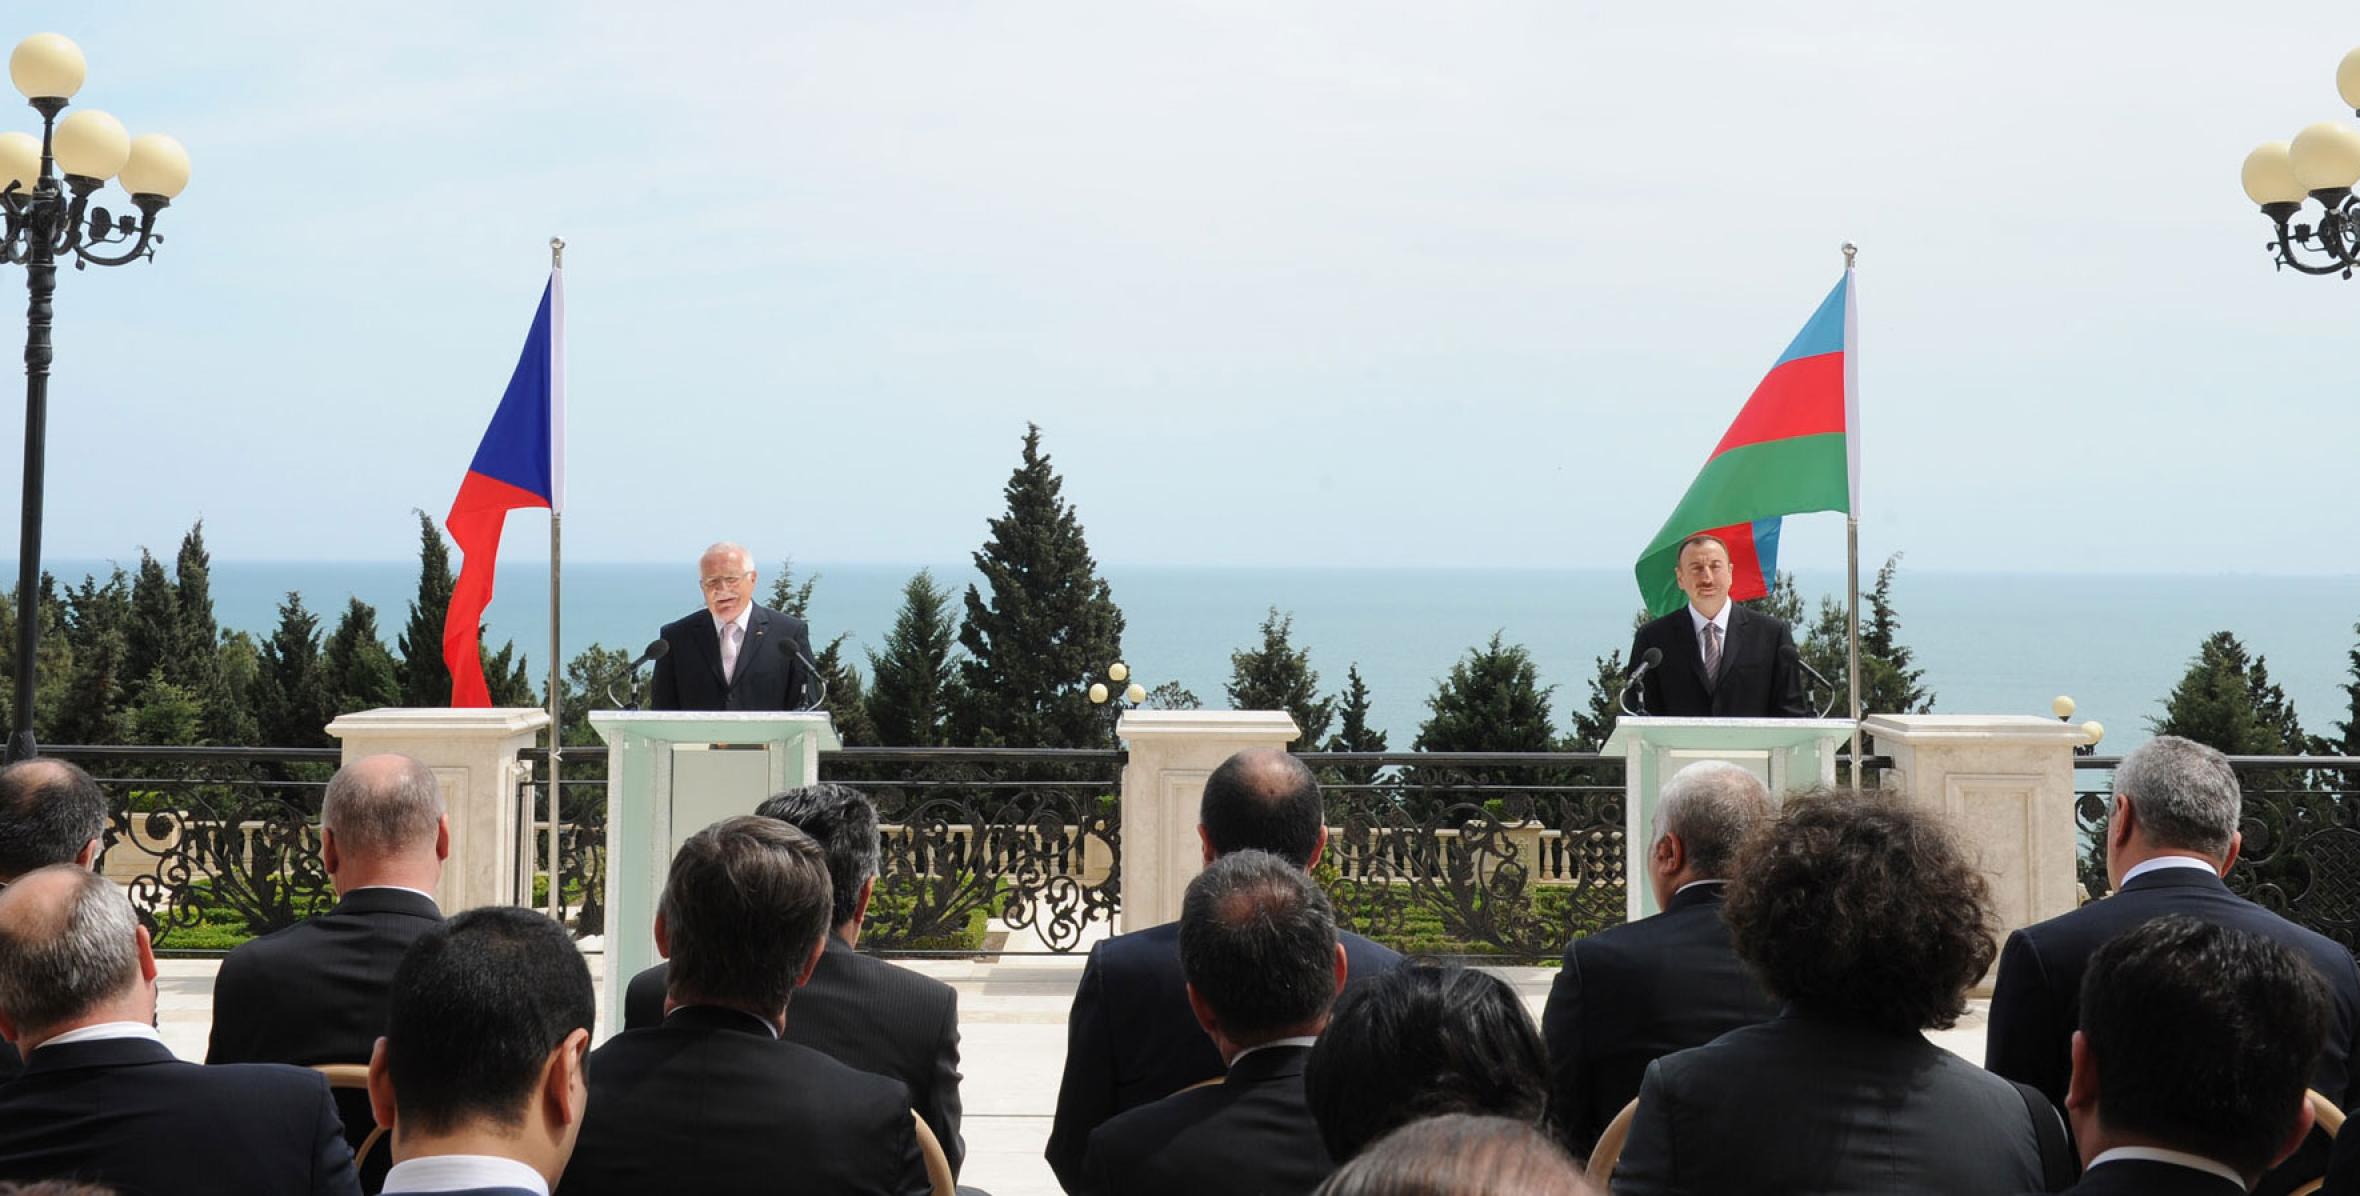 Presidents of Azerbaijan and the Czech Republic made press statements